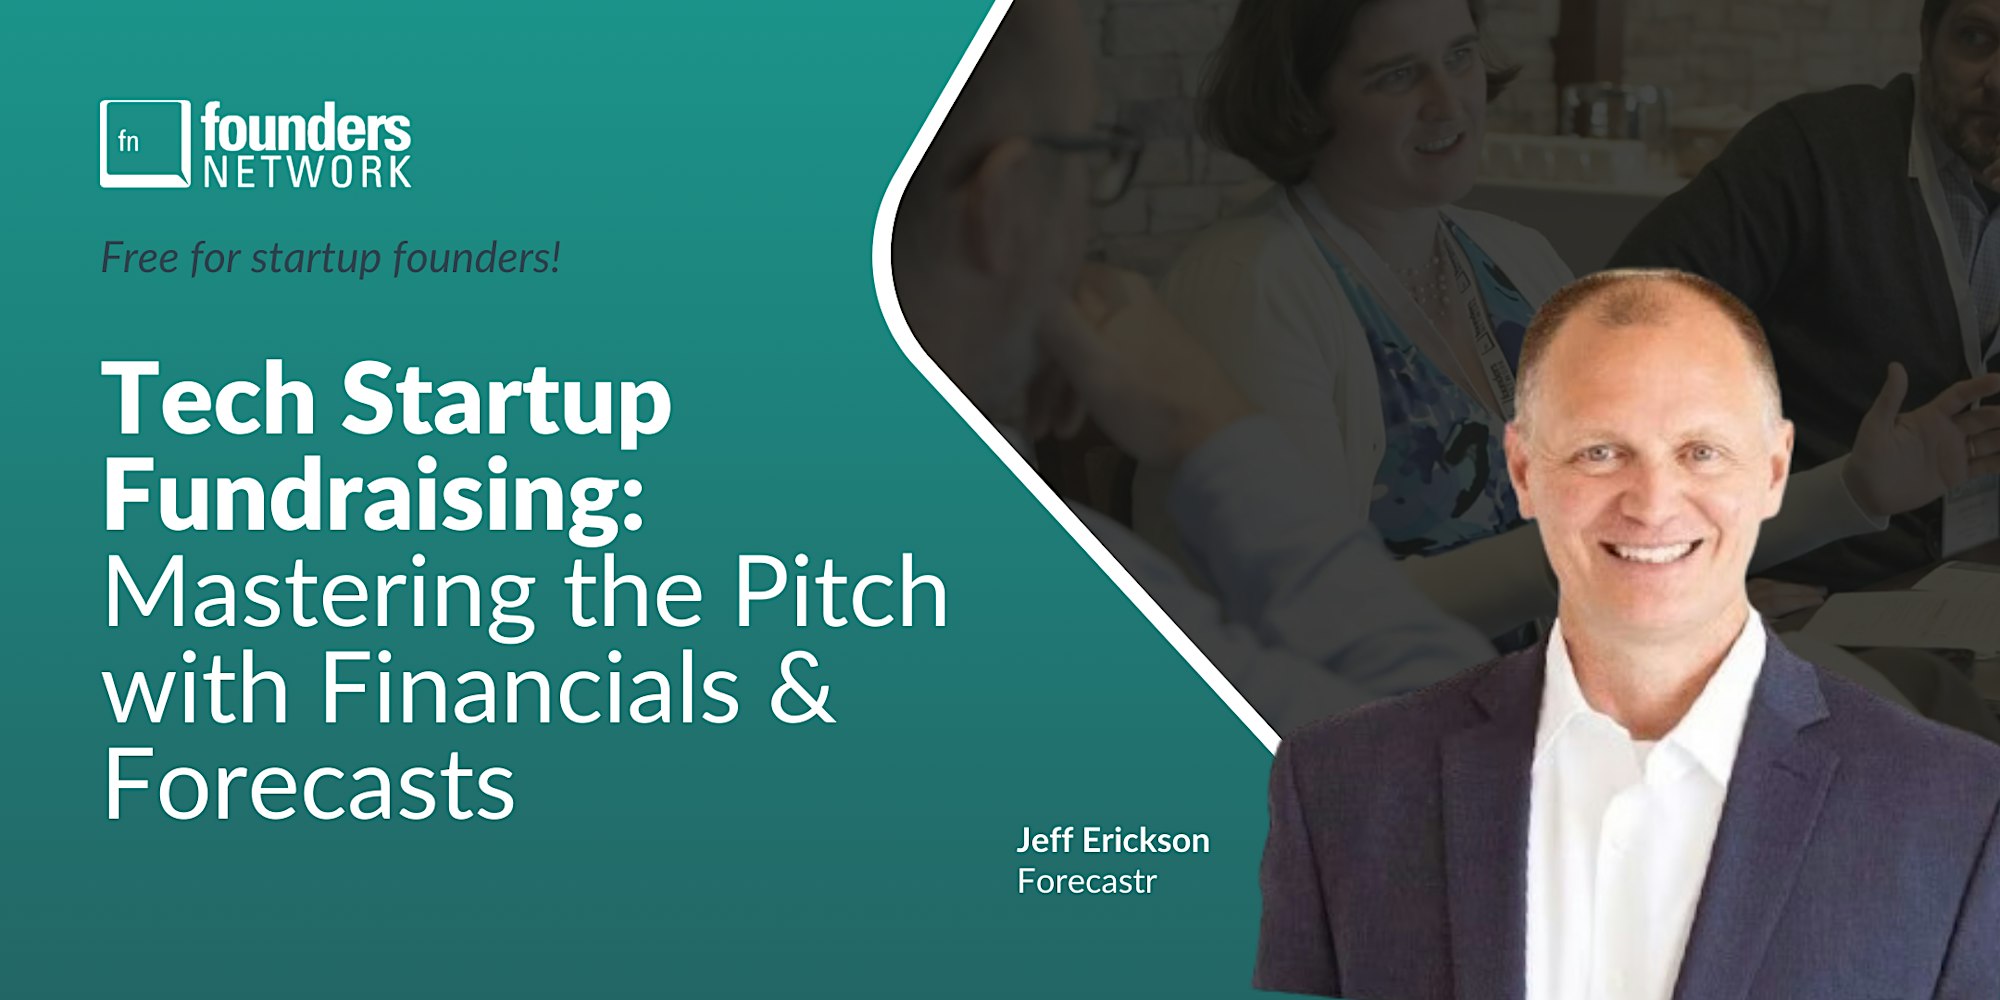 Featured image for “Tech Startup Fundraising: Mastering the Pitch with Financials & Forecasts”